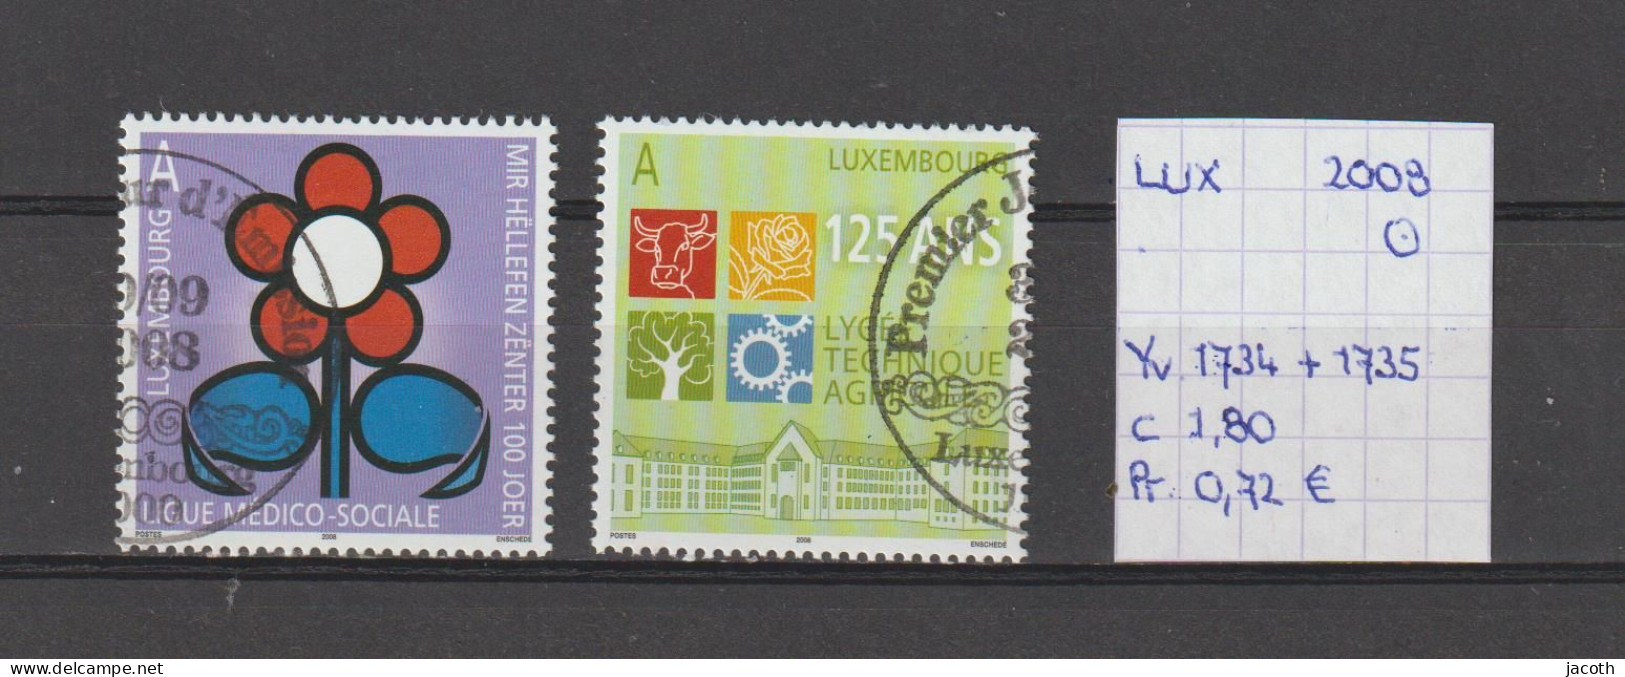 (TJ) Luxembourg 2008 - YT 1734 + 1735 (gest./obl./used) - Usados